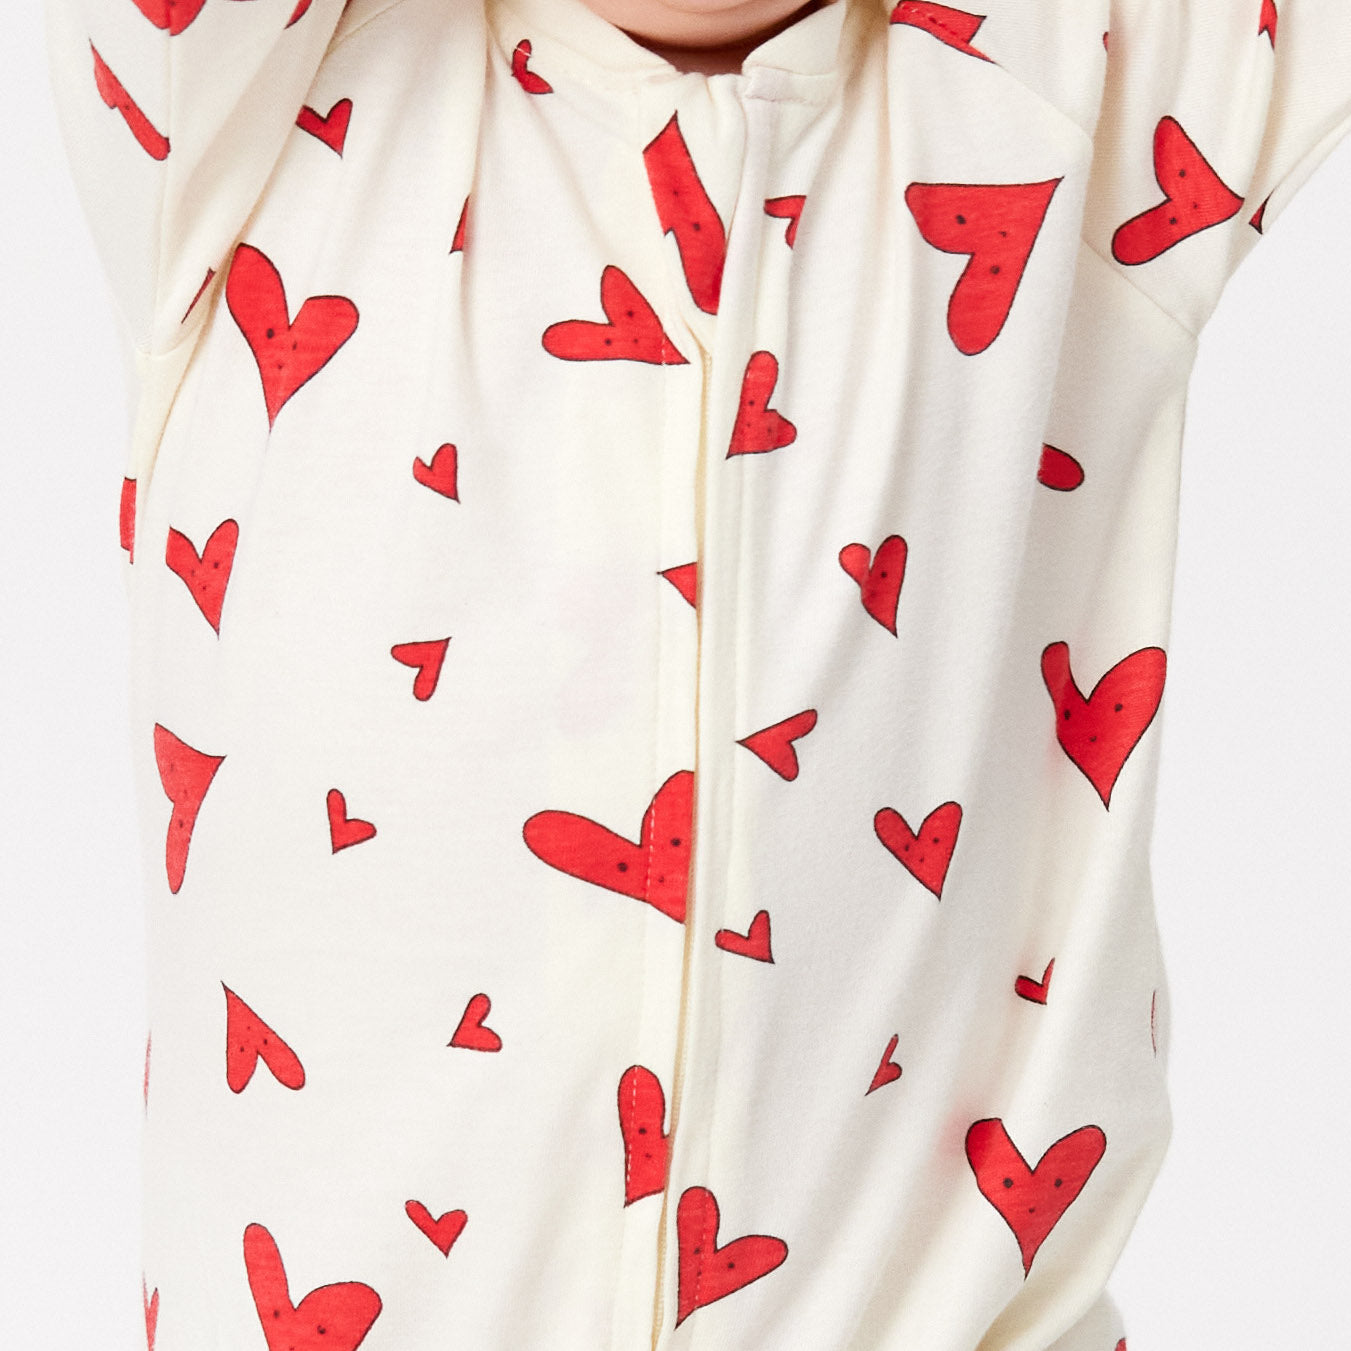 "I got your heart" cream / red baby sleepsuit - GOTS certified 100% organic cotton